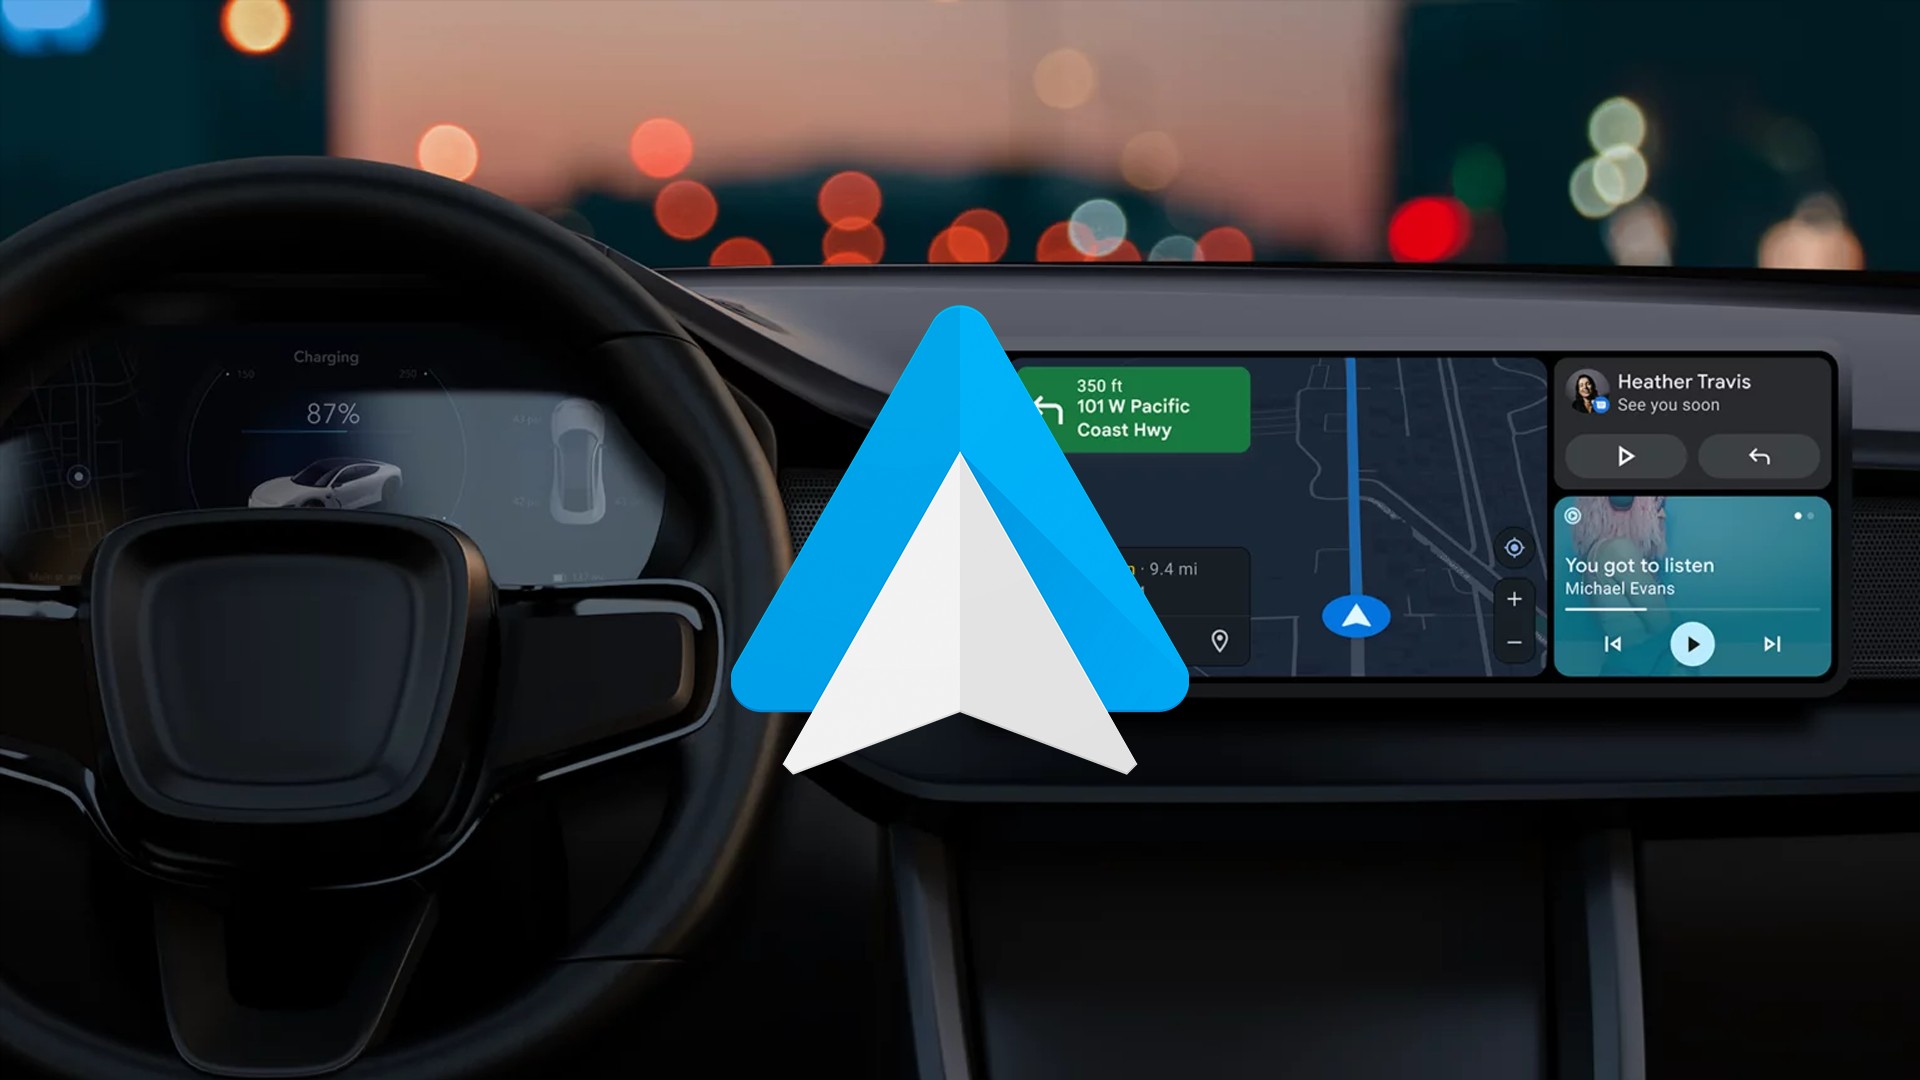 Android Auto 11.0 update tweaks the interface when connecting to Samsung devices